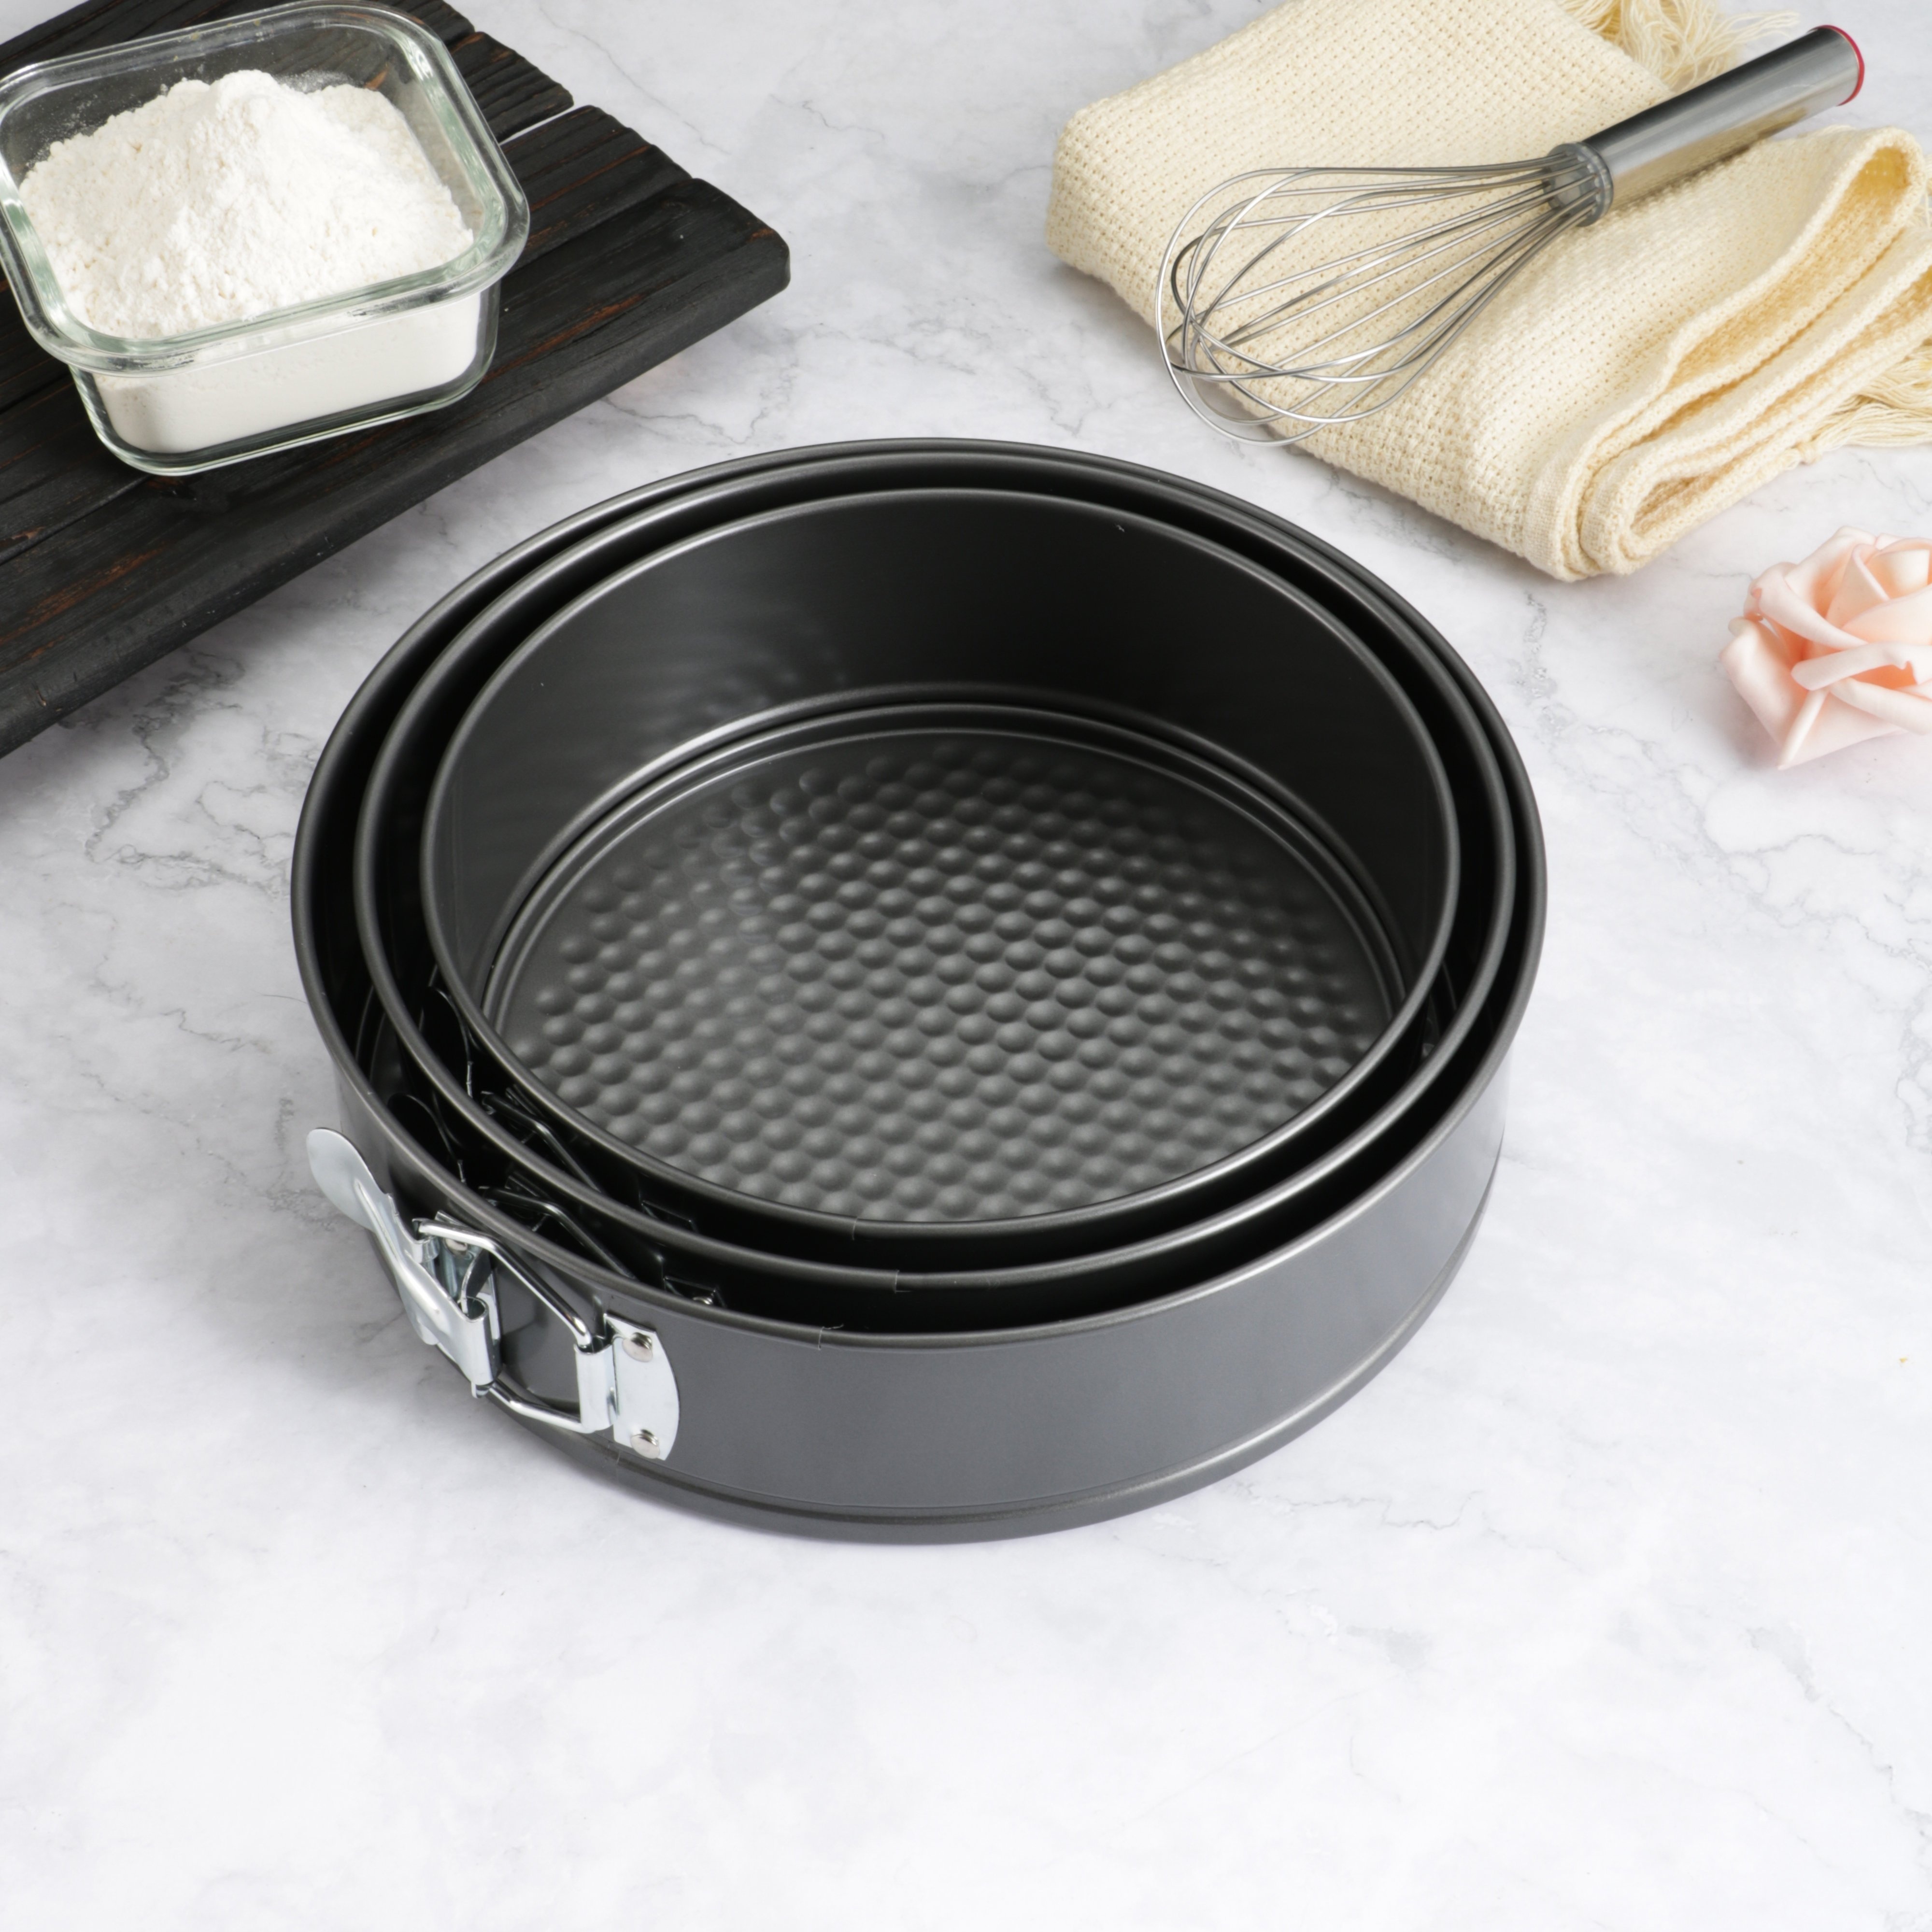 7 Inch Springform and Bundt Pans, Non-stick Cheesecake and Ice-Cream Cake  Bakeware,Carbon Steel Tube Pan 2 in 1 with Removable Bottom and